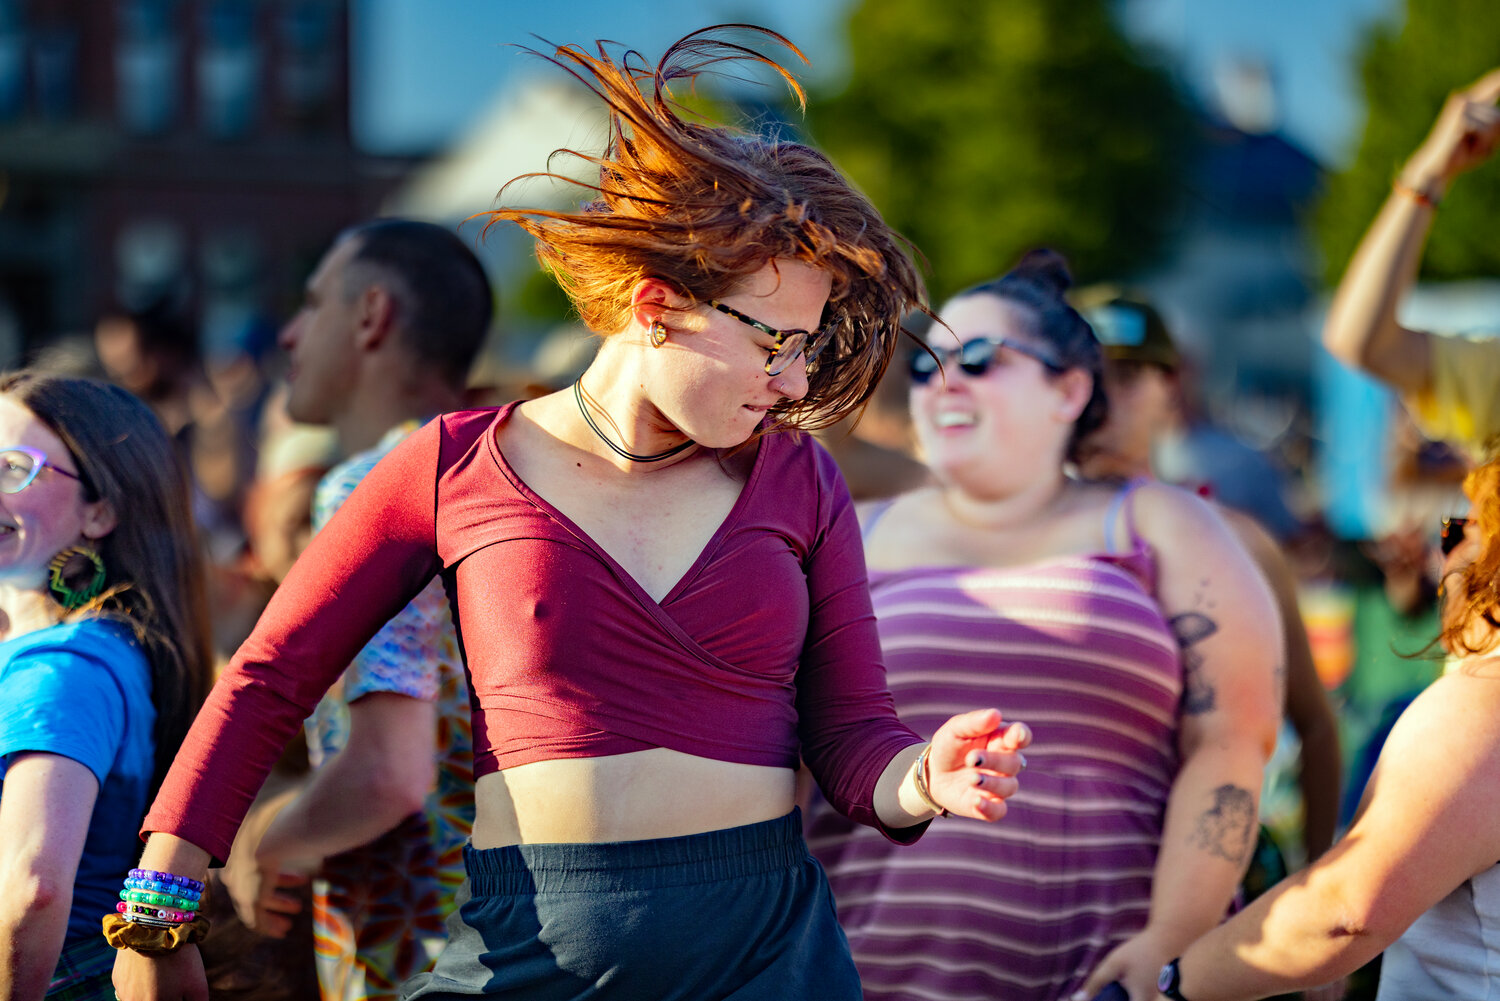 Dancers rock out to bagpipes, electronic dance music